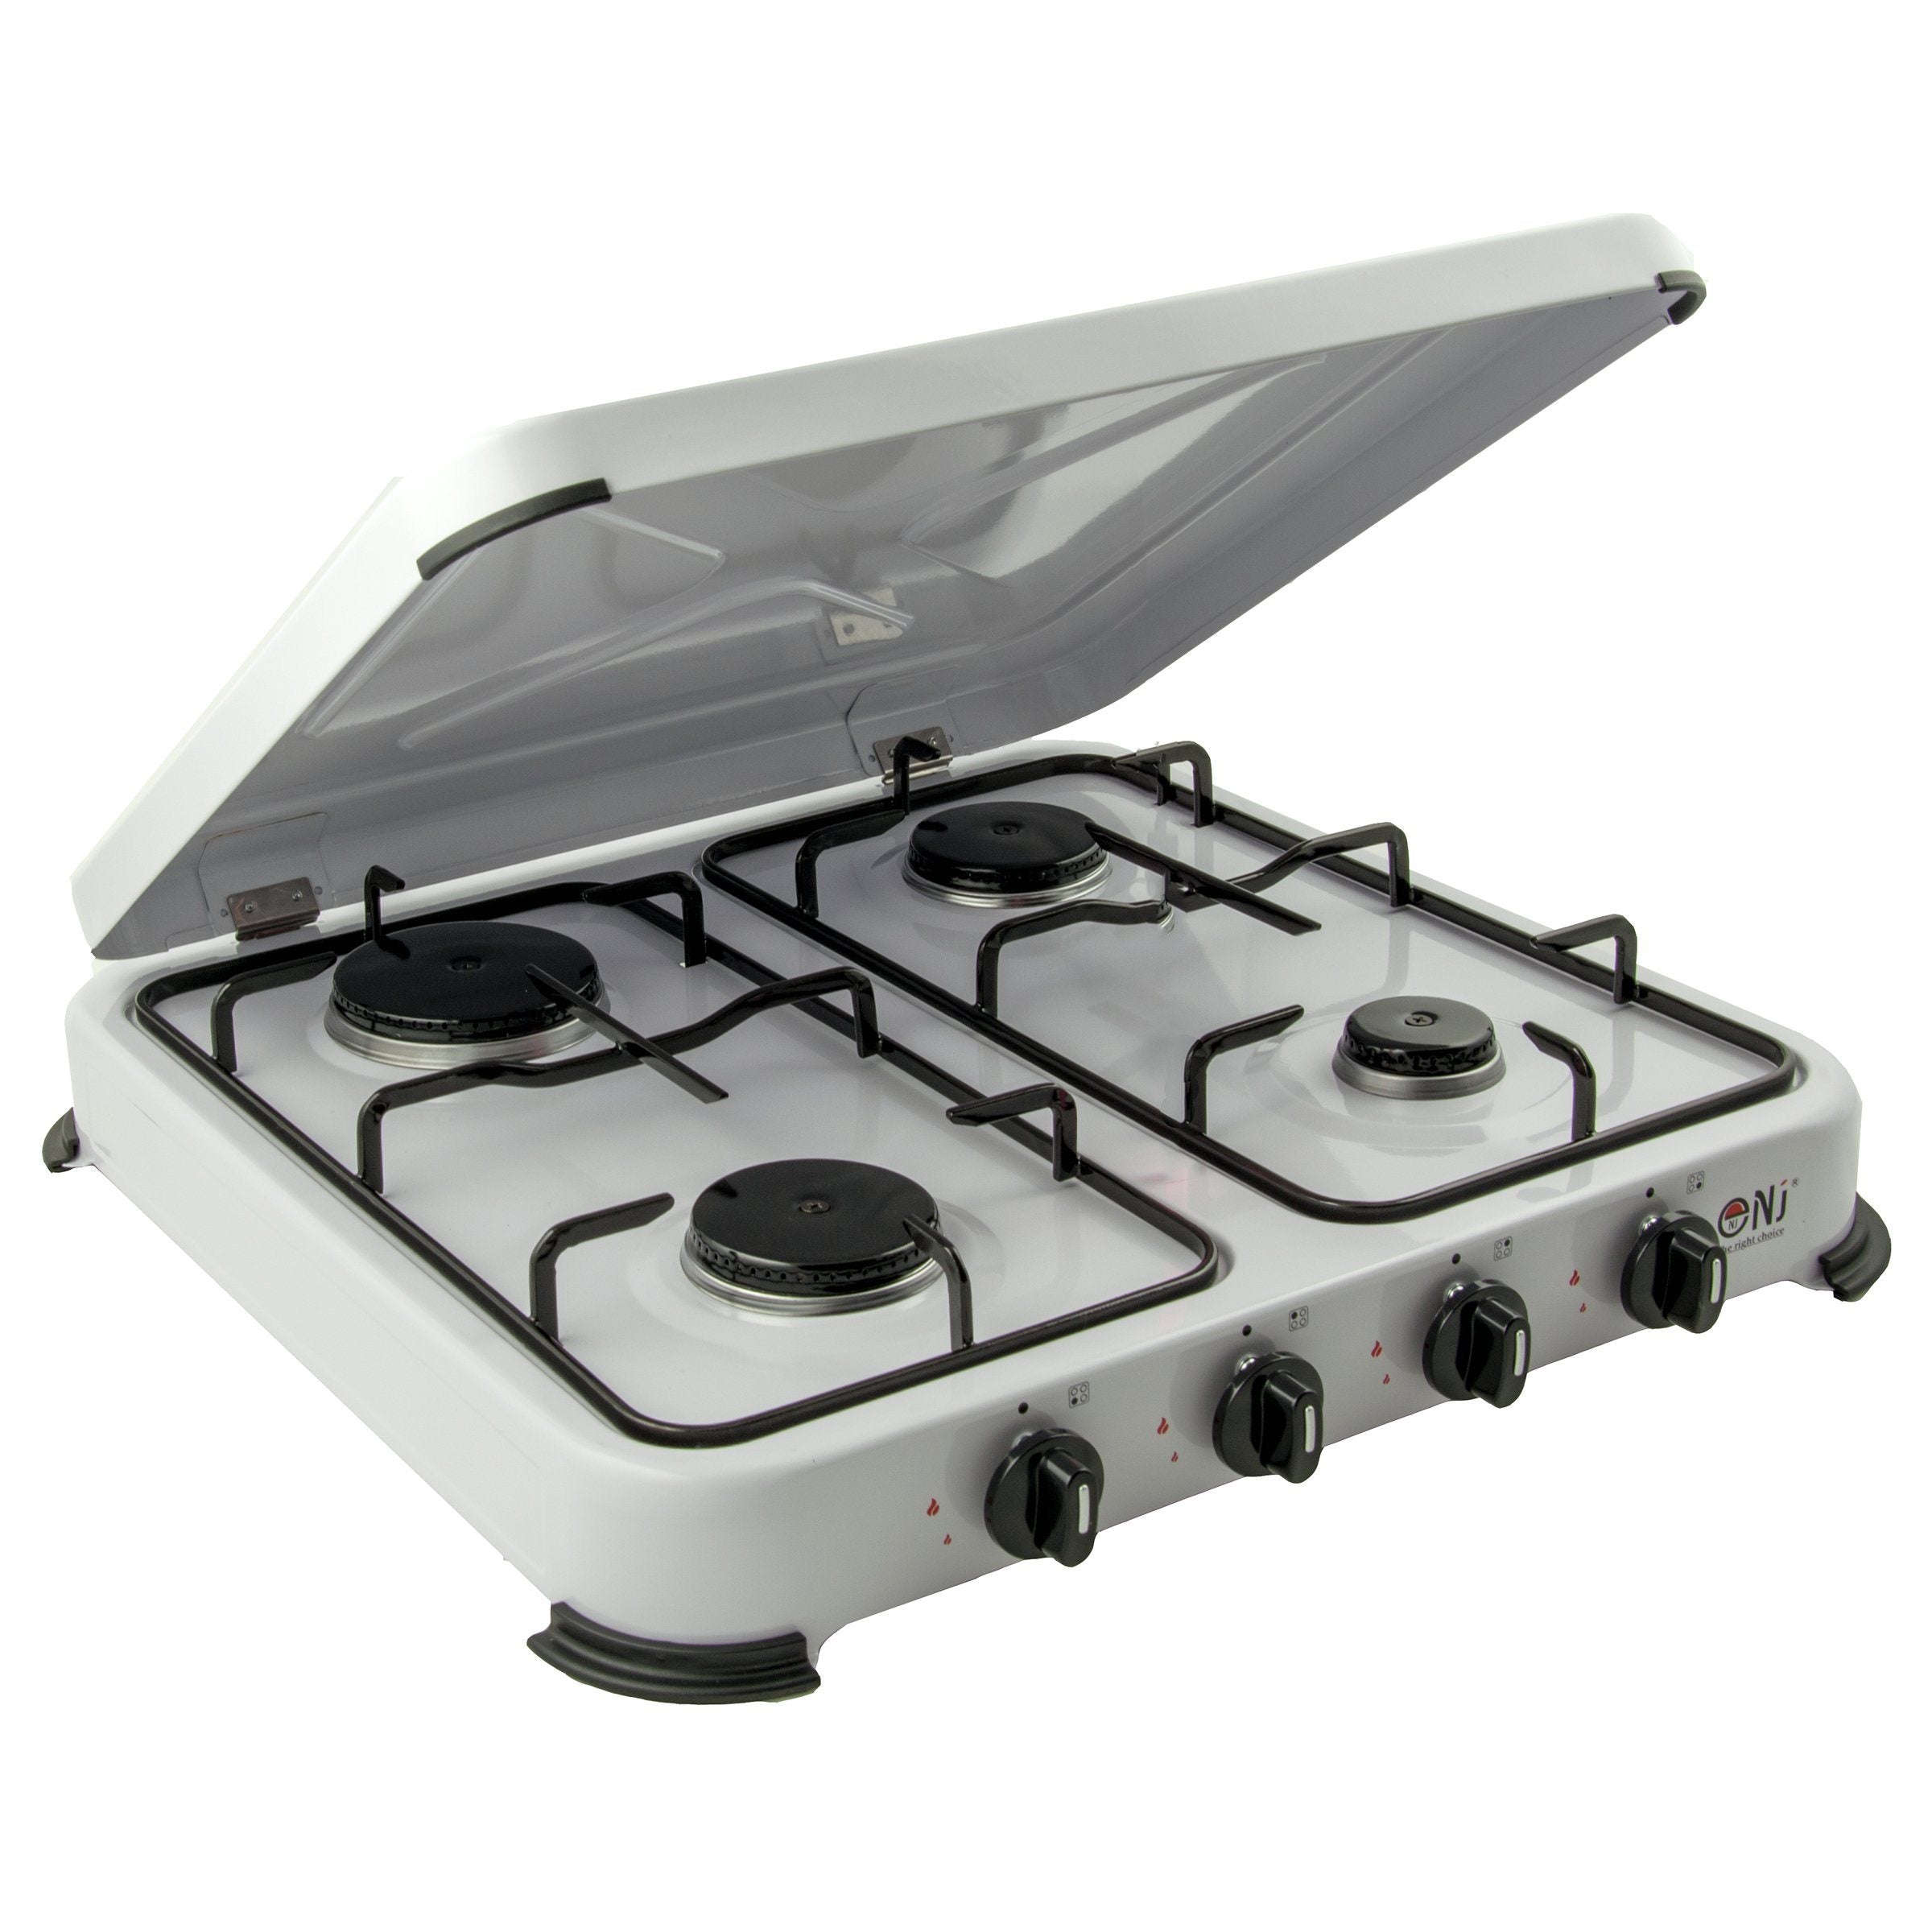 Modern 4 Burner Camping Stove for Small Space